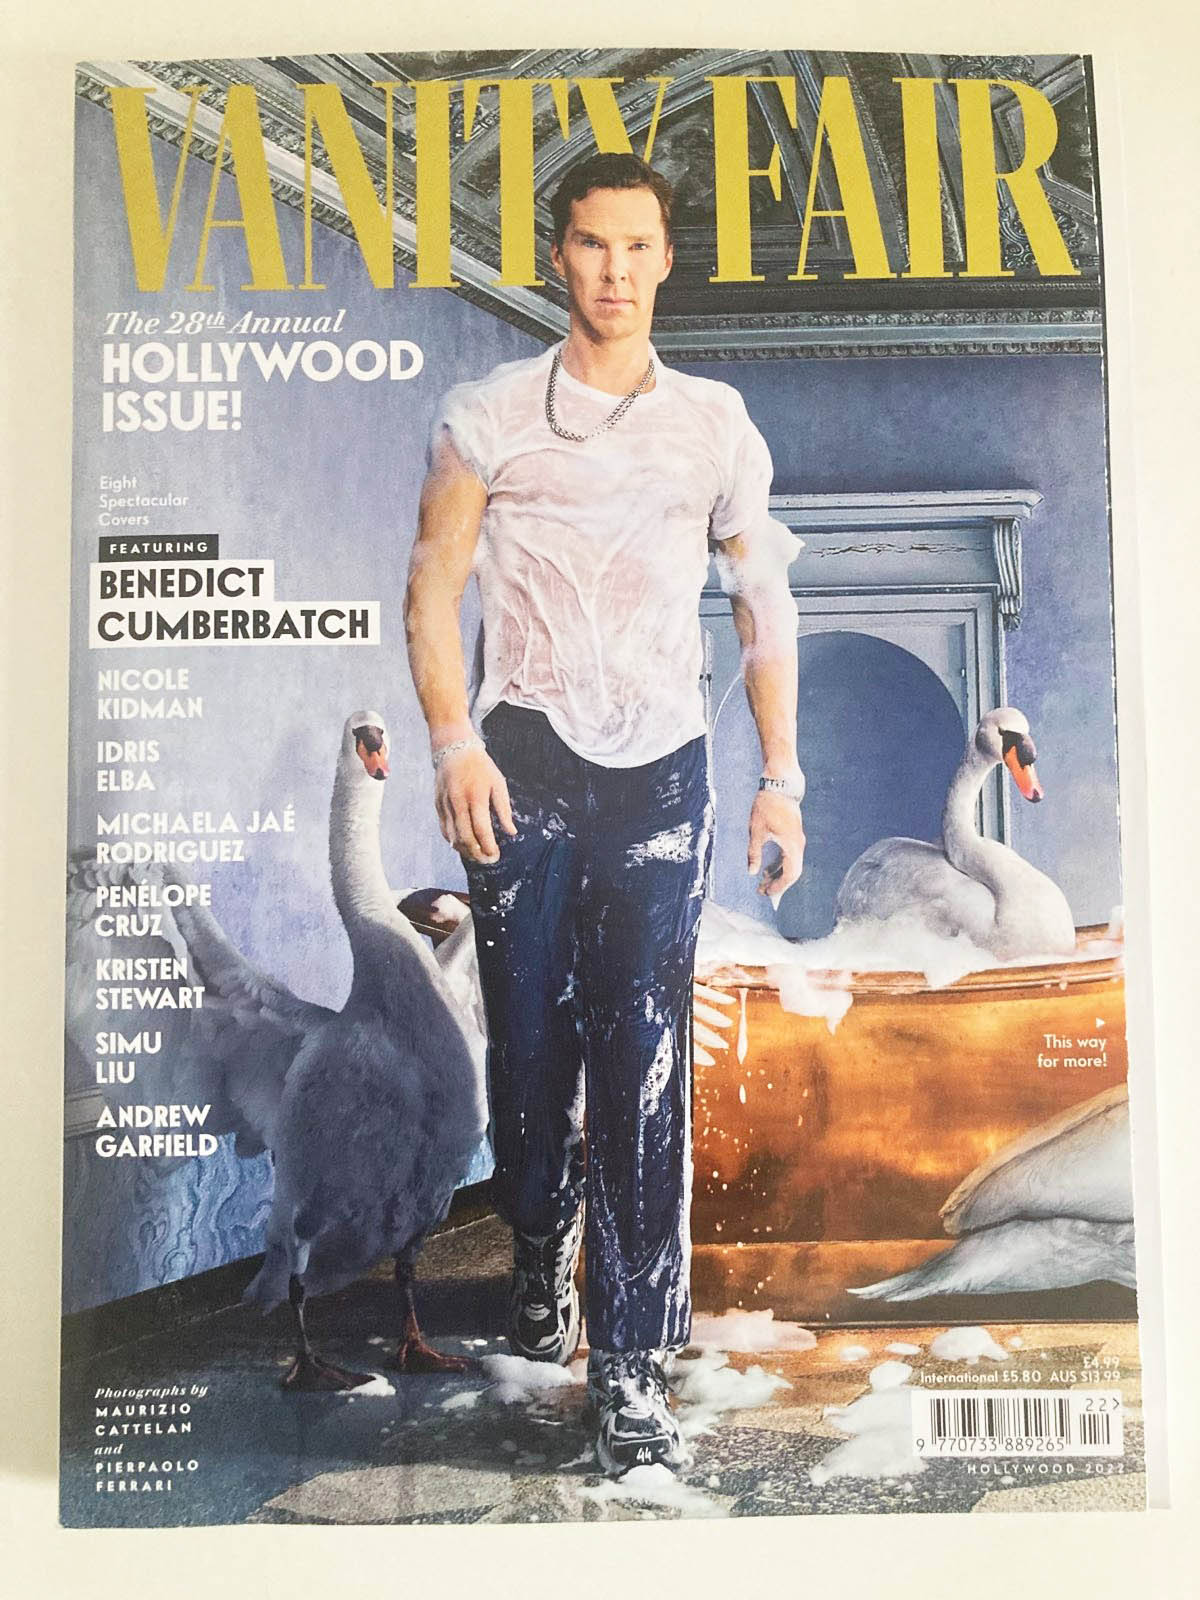 Benedict Cumberbatch The 28th Annual Hollywood Issue Vanity Fair 2022 Magazine Cover - Music Box Gift Ideas